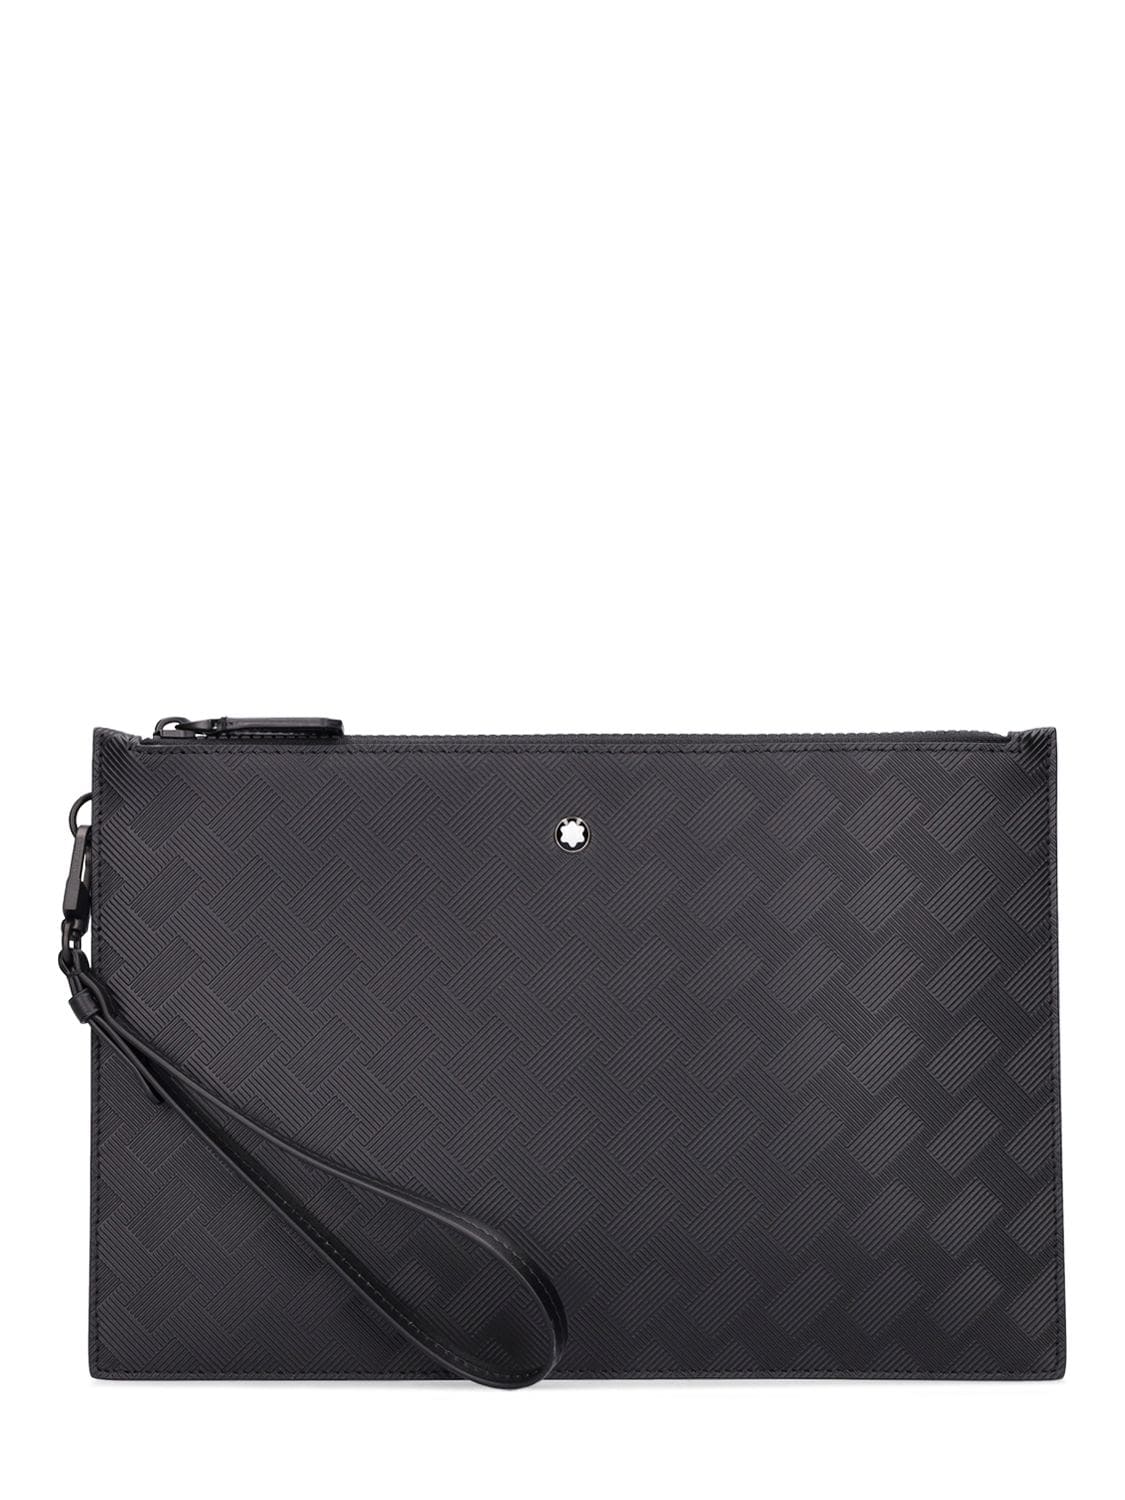 Montblanc Extreme 3.0 Pouch In Black